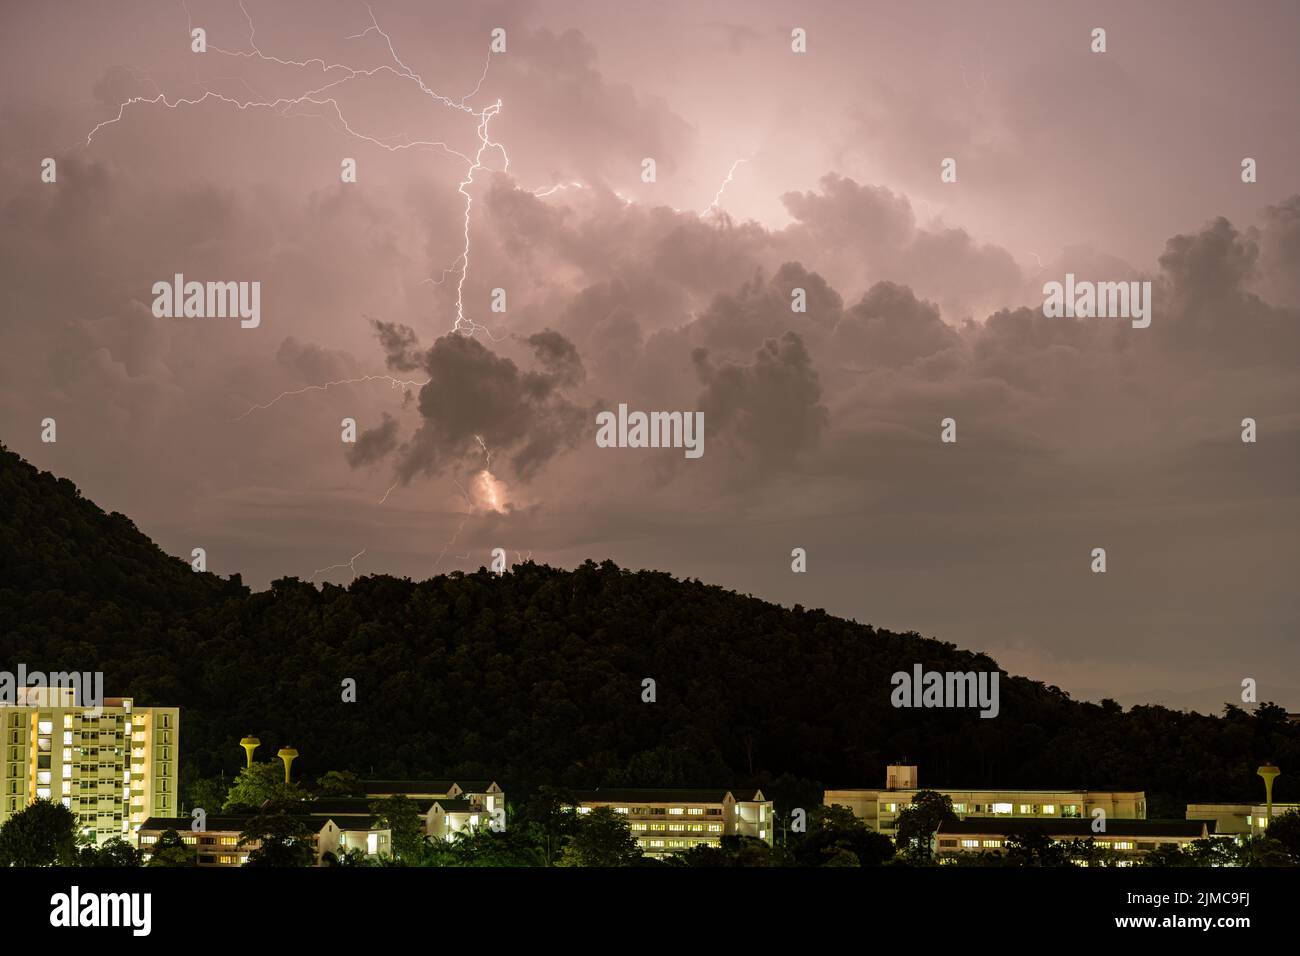 Storm lightning strikes in mountains during a thunderstorm at night. Beautiful dramatic view Stock Photo